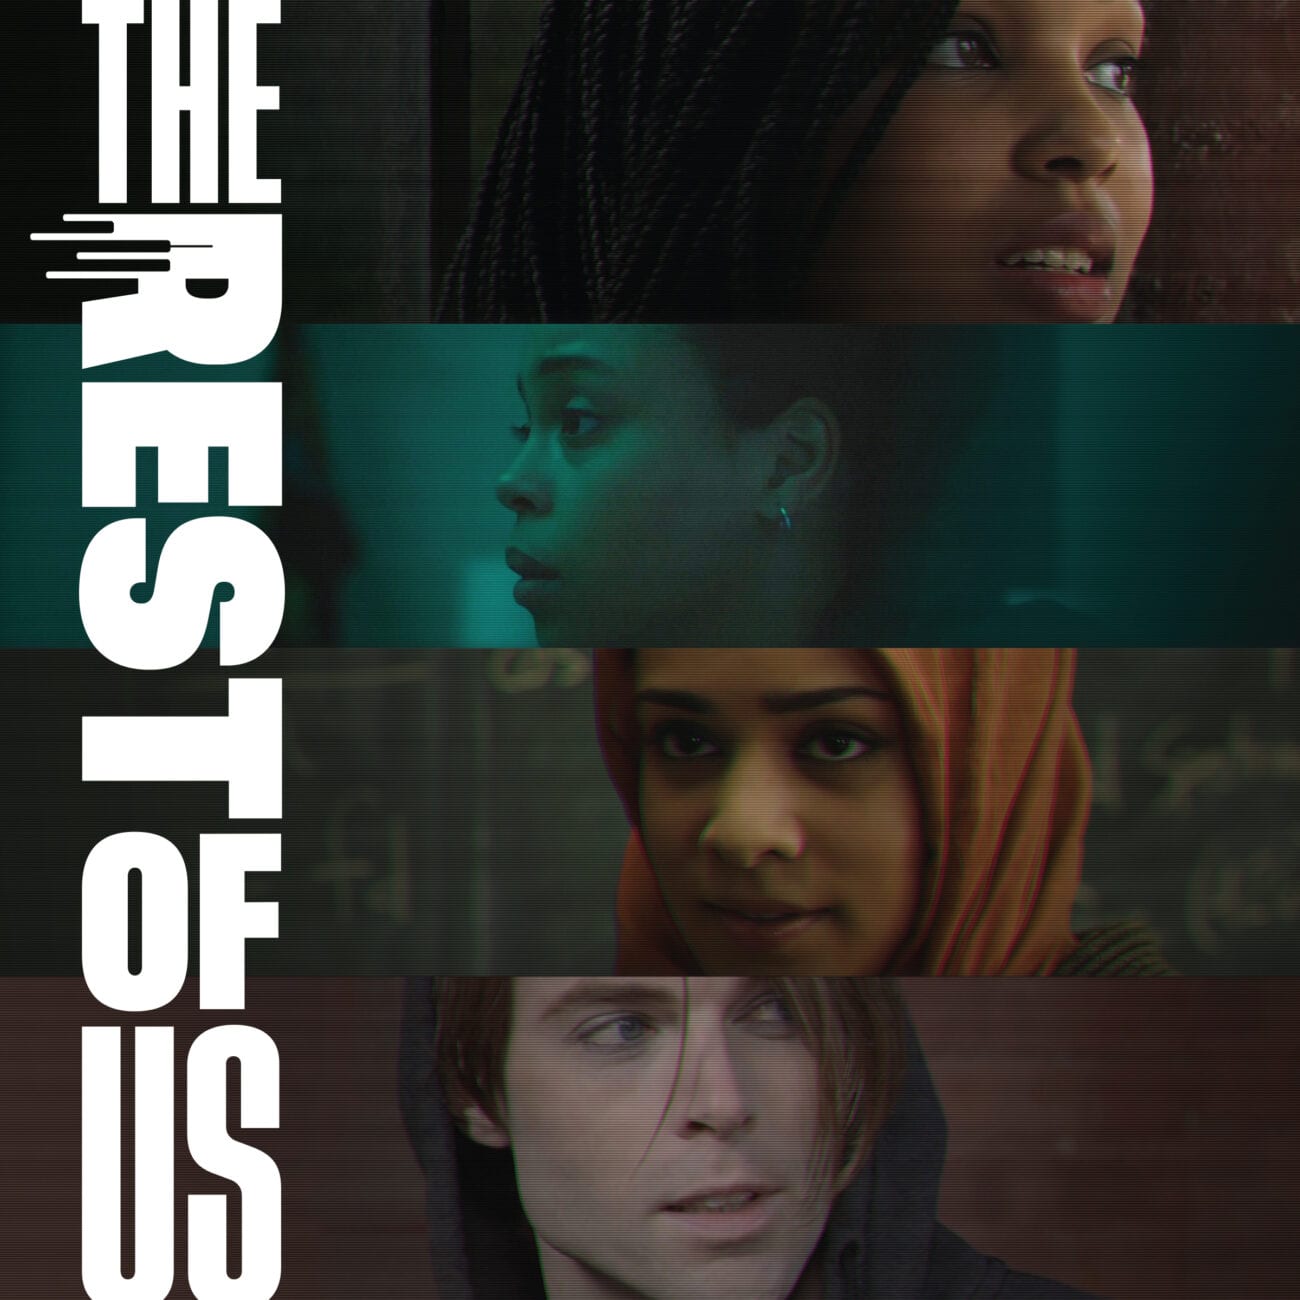 Linda G. Mills is here to bring mental health to the conversation thanks to her new film 'The Rest of Us'. Hear our interview with the director.